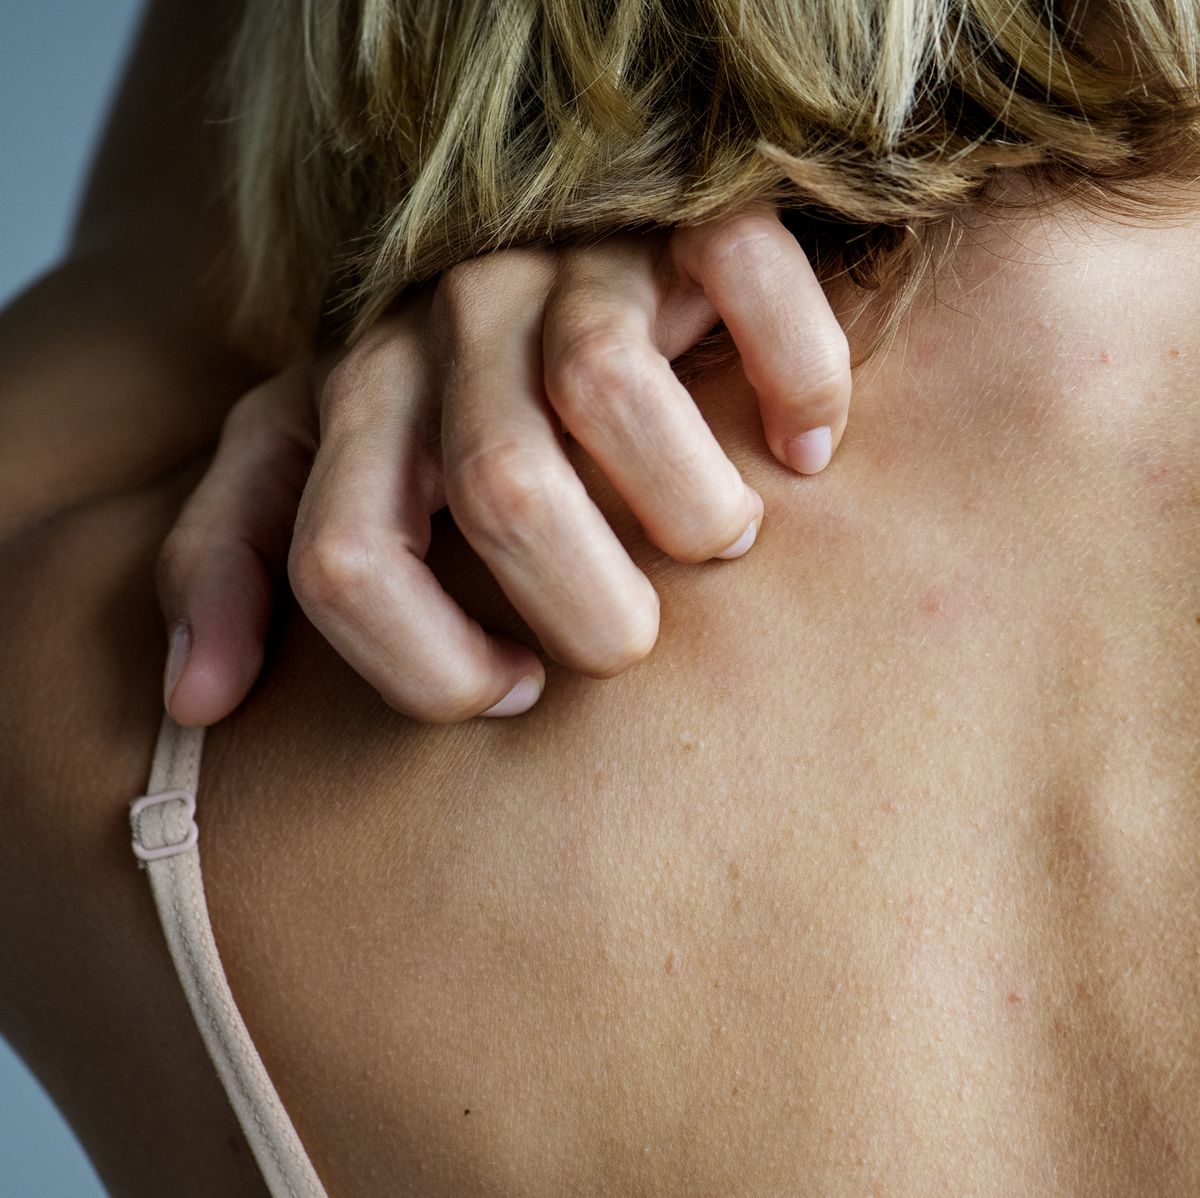 Itchy skin: 14 causes, pictures and treatments